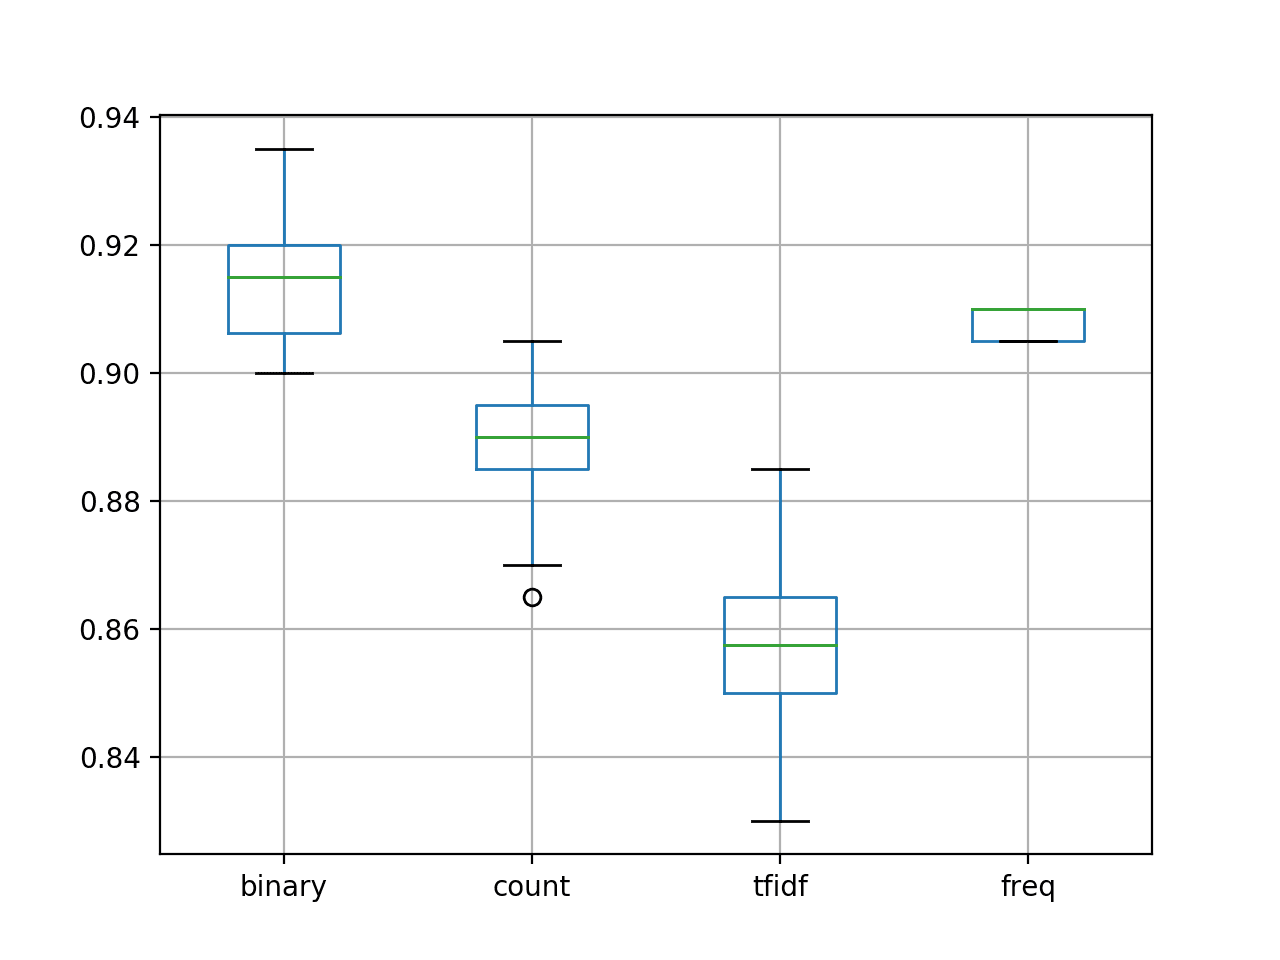 Box and Whisker Plot for Model Accuracy with Different Word Scoring Methods